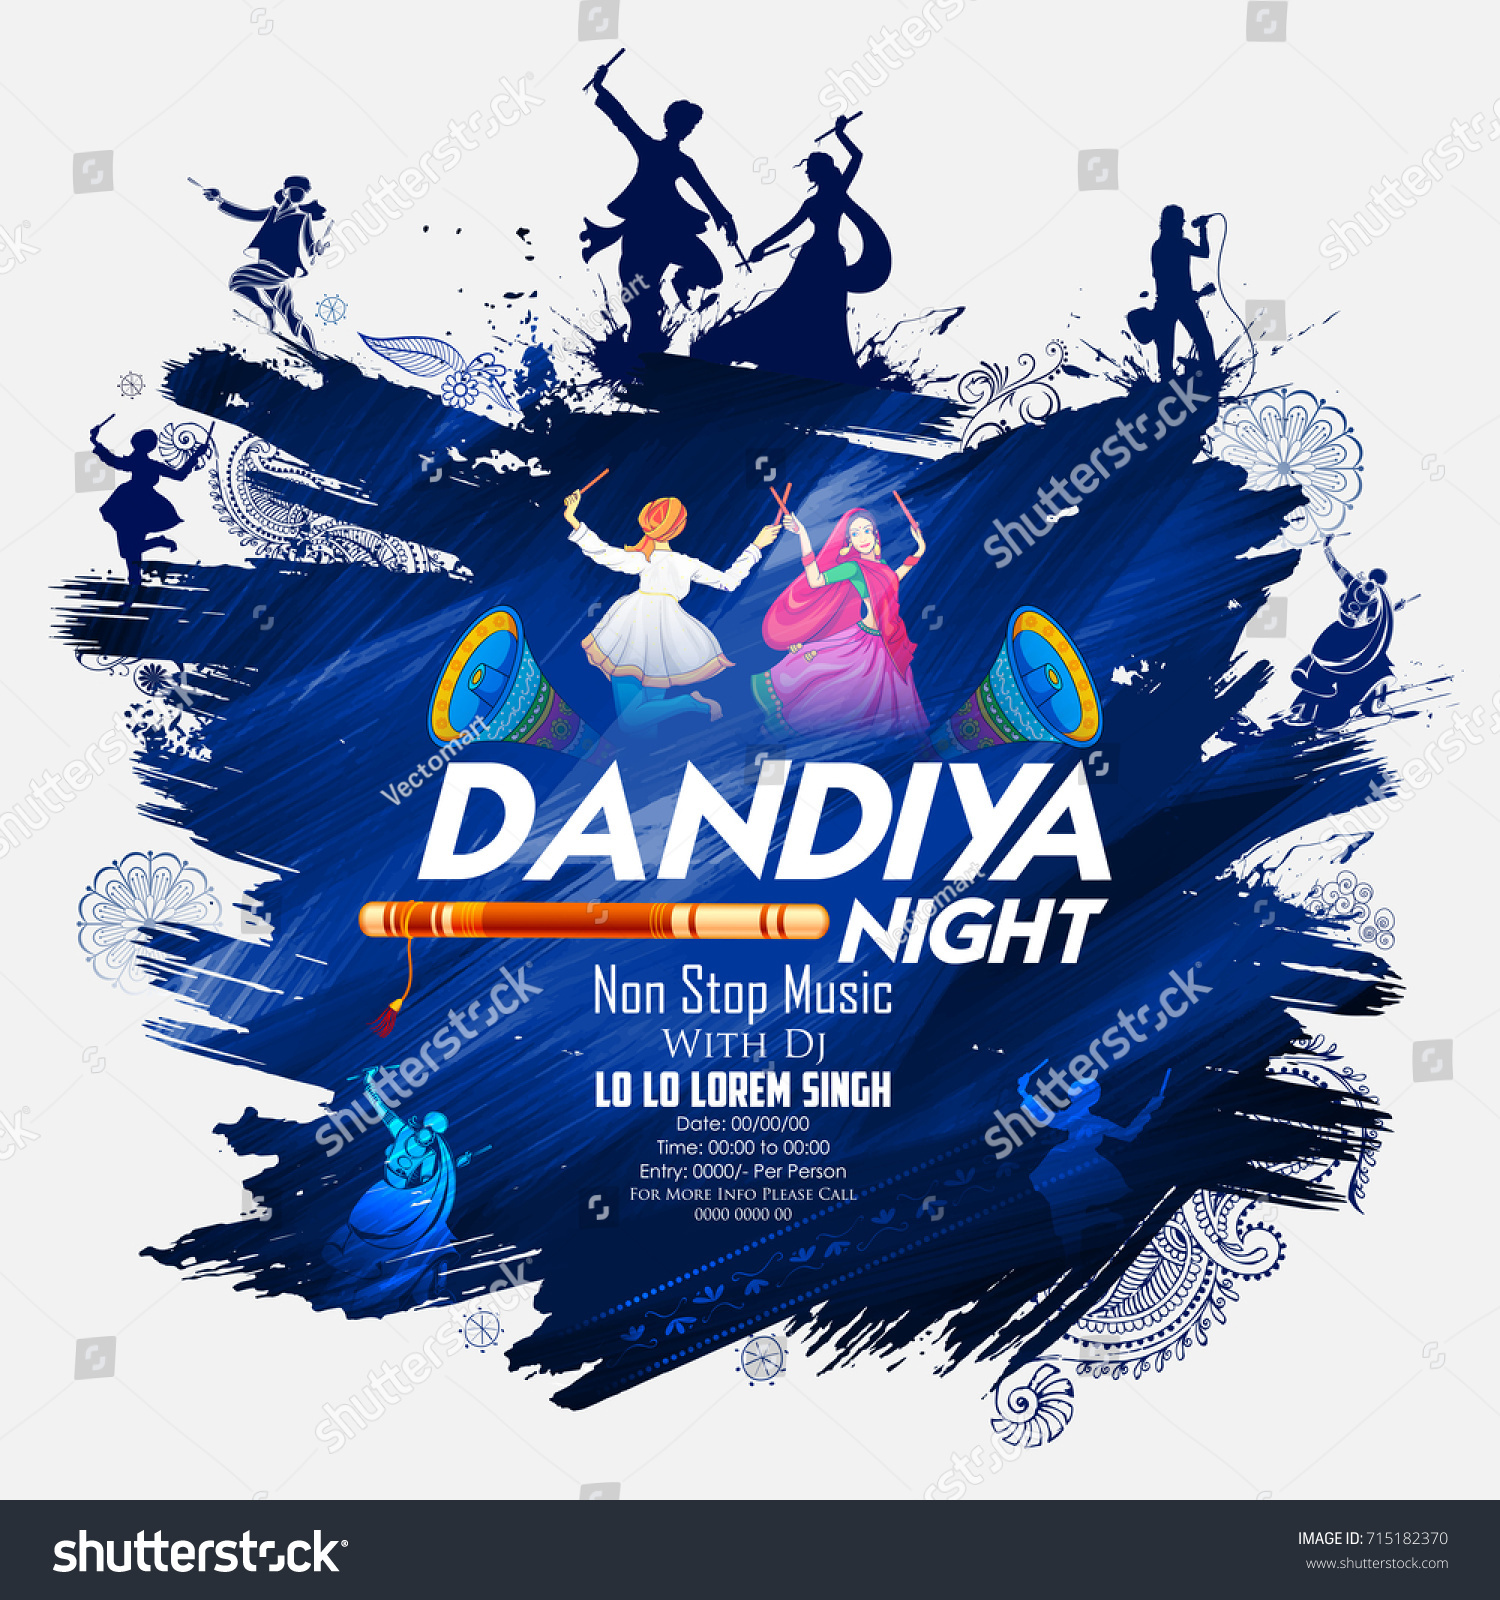 SVG of illustration of couple playing Dandiya in disco Garba Night poster for Navratri Dussehra festival of India svg